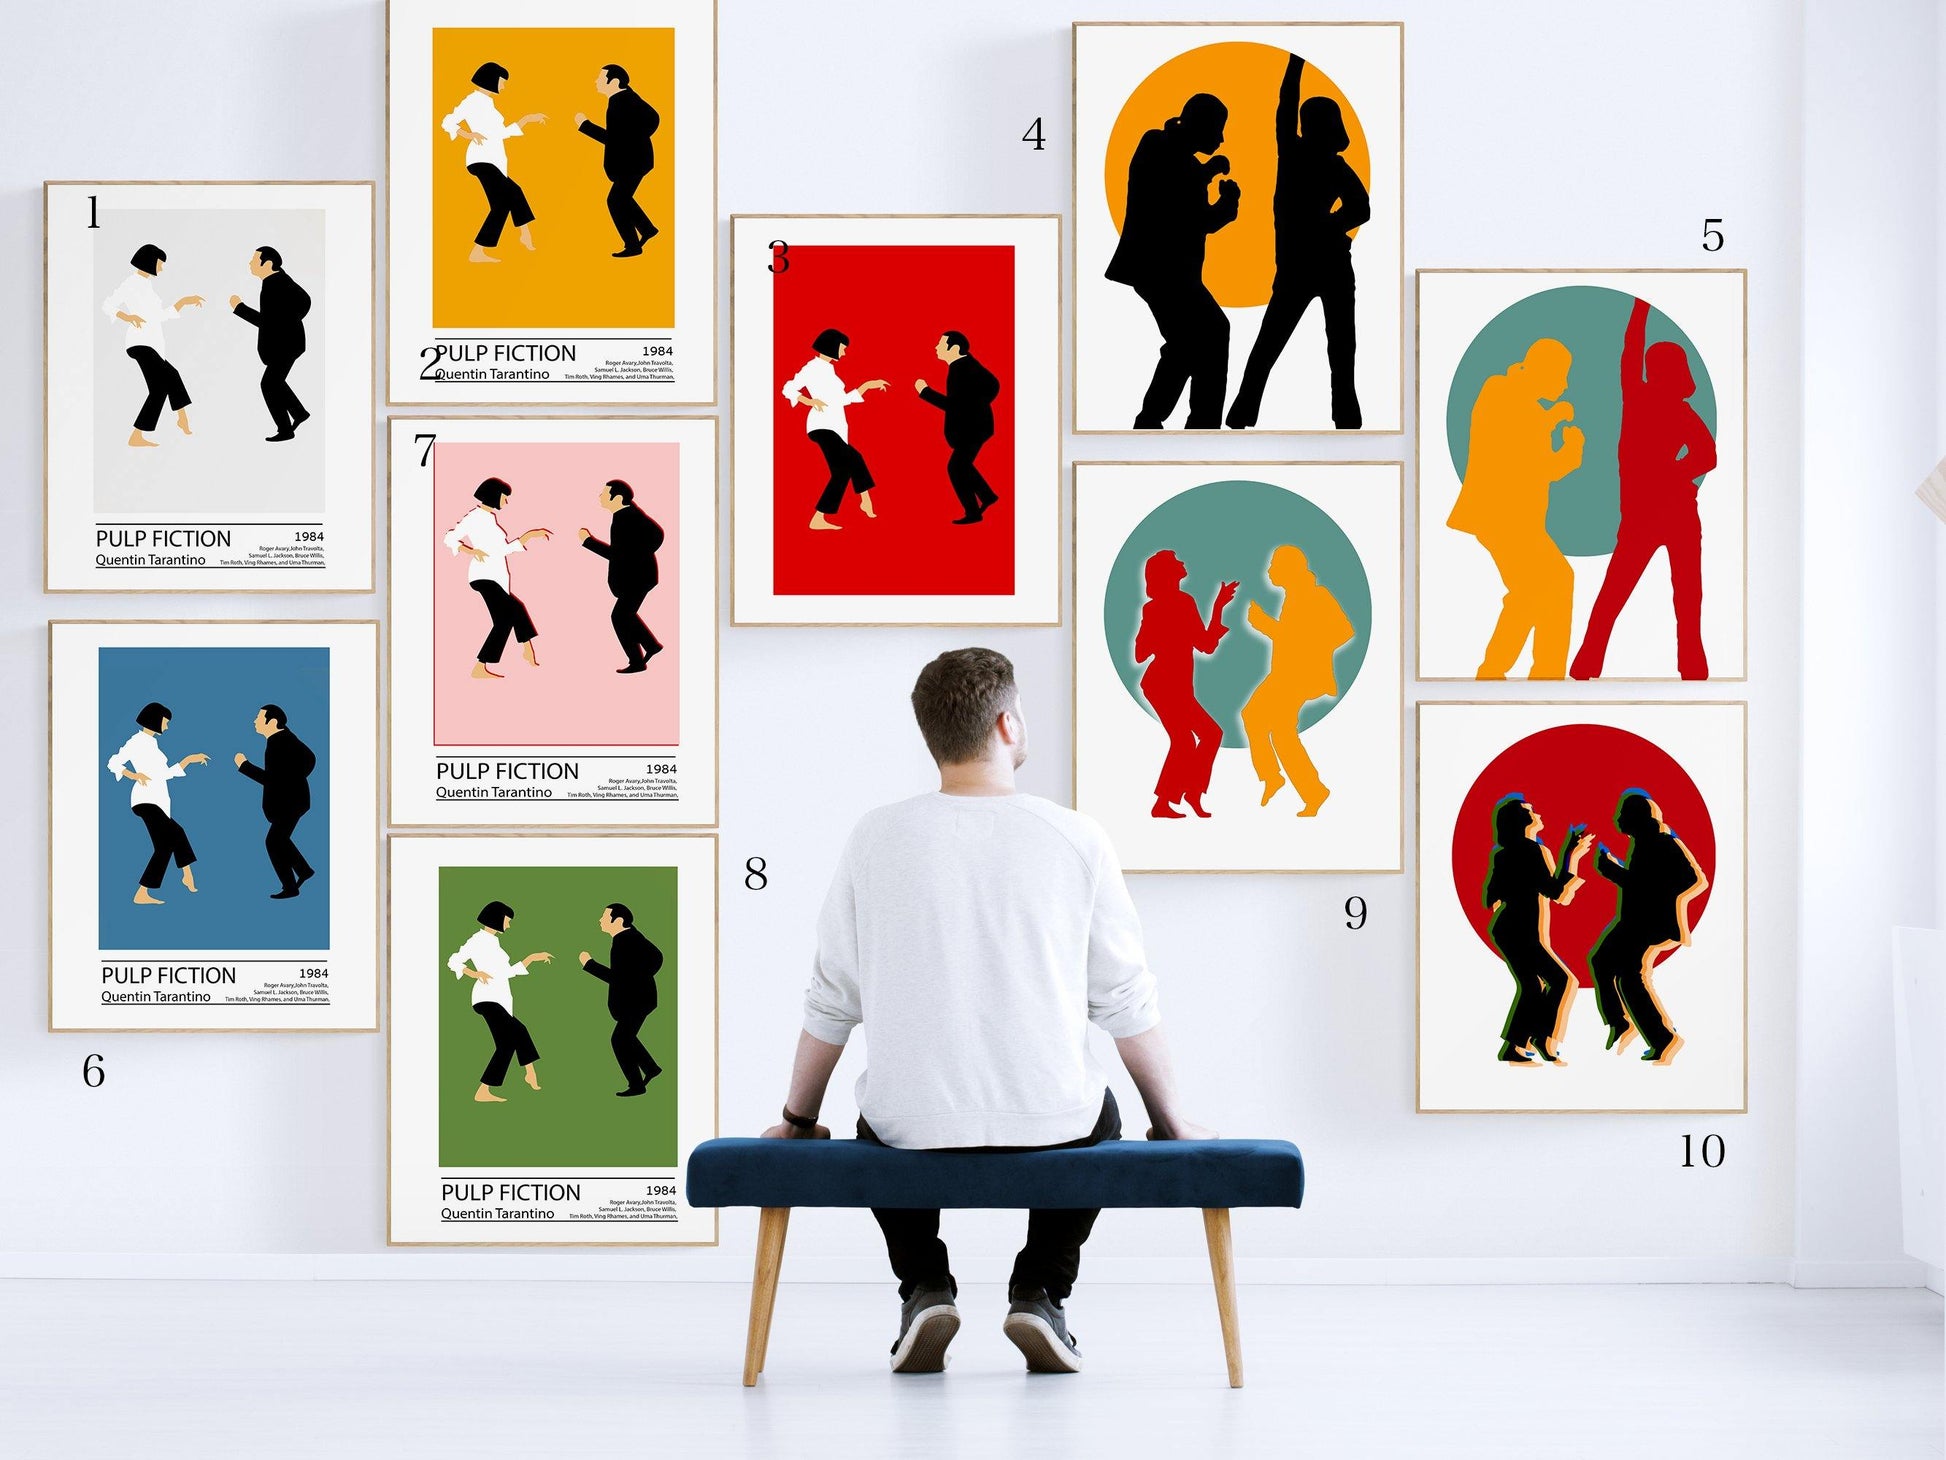 poster la movie poster print now showing movie poster frame pulp fiction poster uk bruno poster design movie poster movie poster reprints pulp fiction signed poster pulp fiction movie cover pulp fiction dance scene poster fiction poster pulp fiction movie poster framed